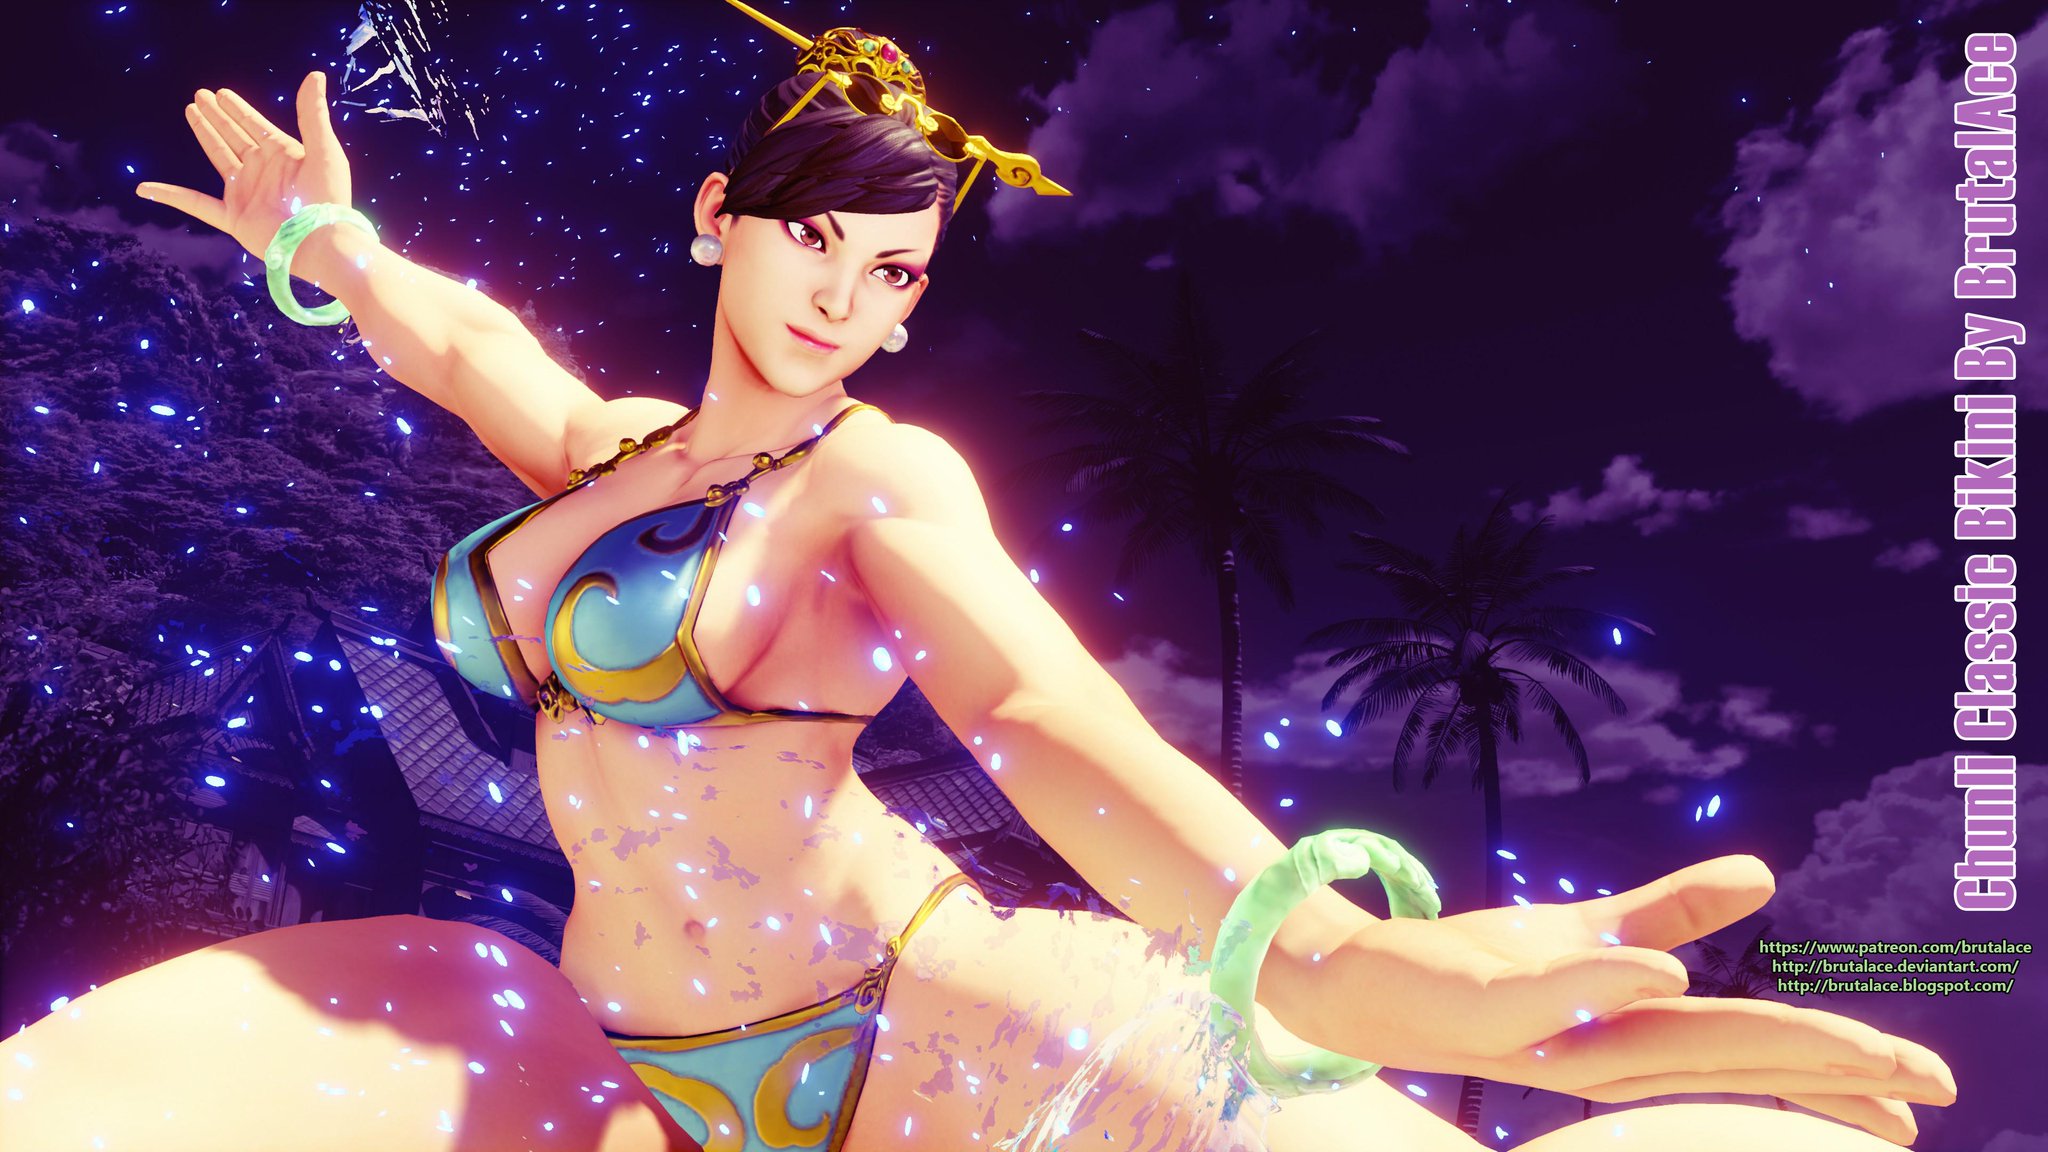 “Check out these voluptuous screenshots in high resolution featuring Chunli Classic ...